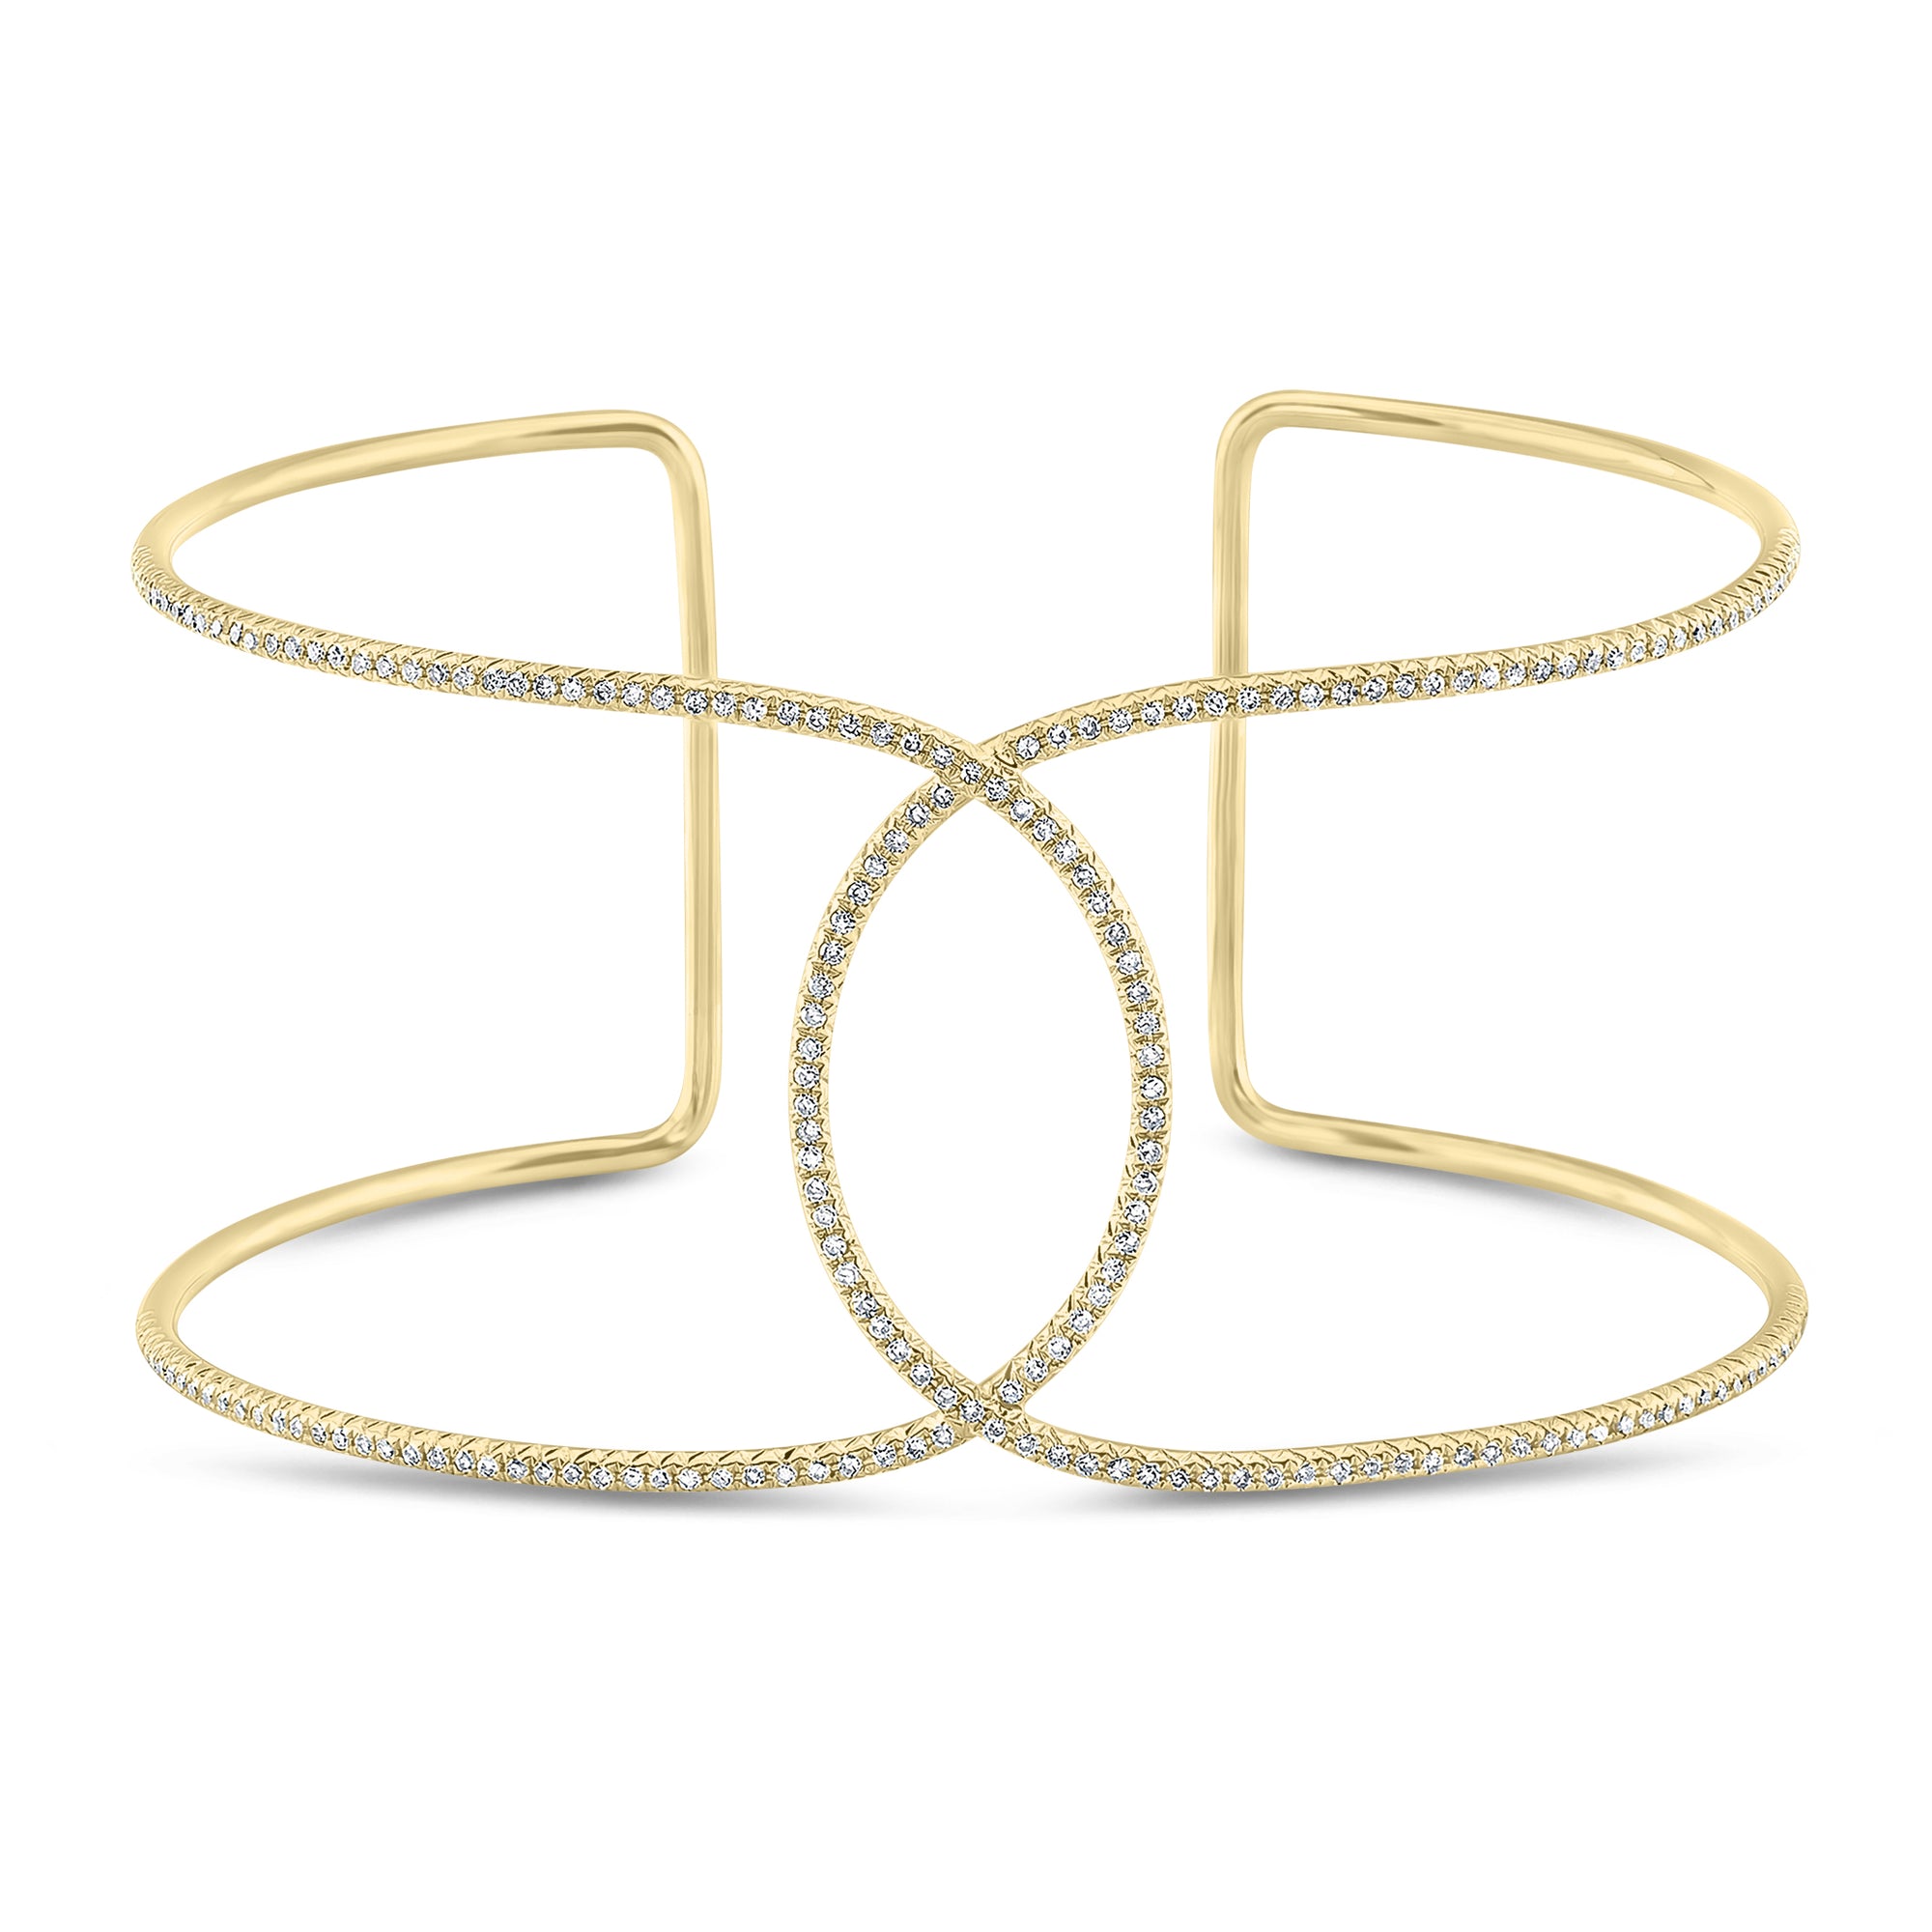 Diamond infinity cuff bracelet 14kt gold weighing 7.85 grams  161 round diamonds weighing .41 cts